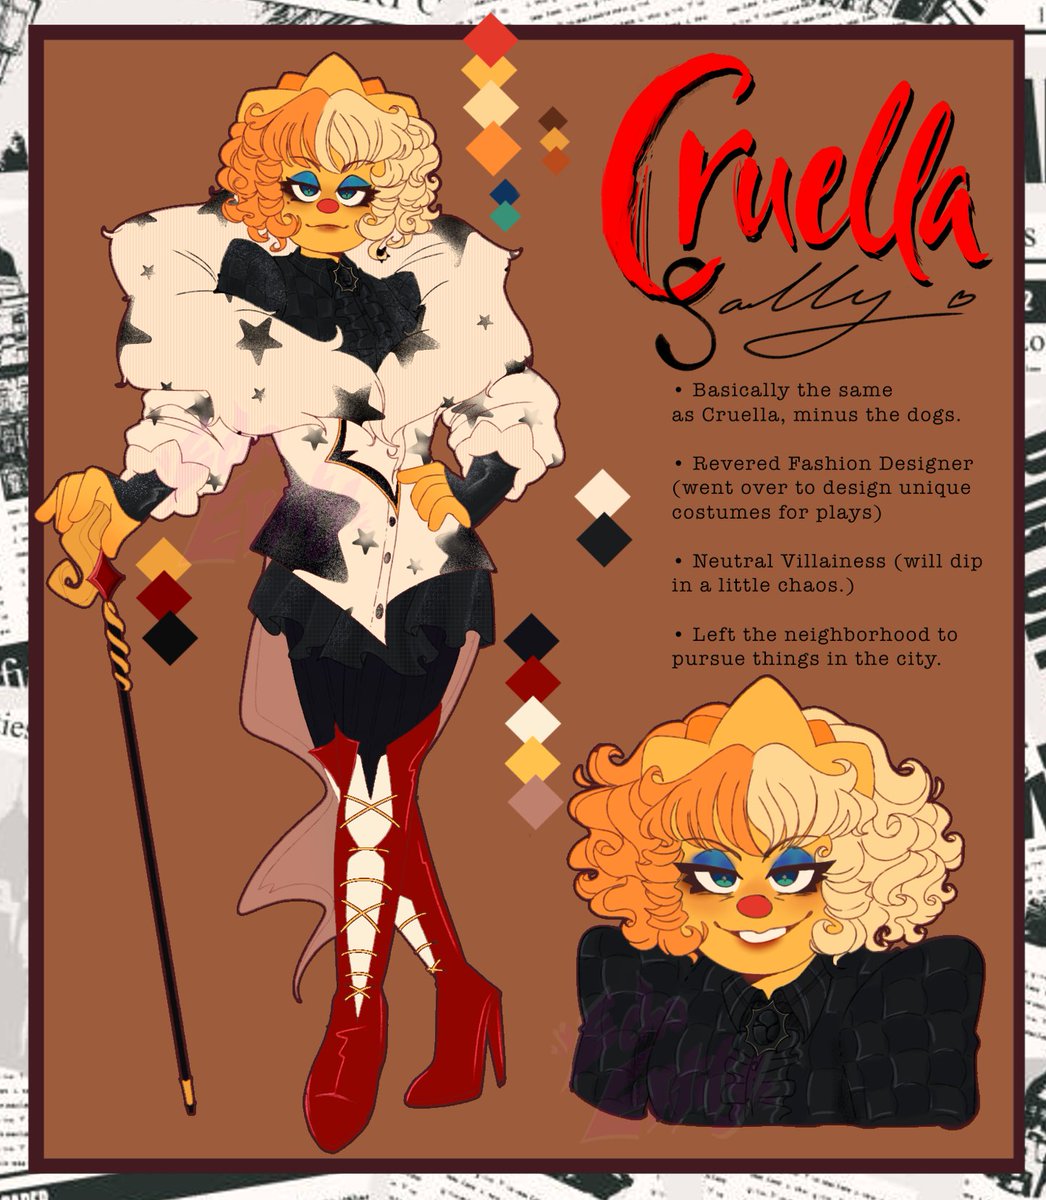 Cruella Sally now exists! Weewoooo
[I made her too pretty for me]

#sallystarlet #WelcomeHomeAU #WelcomeHome #WelcomeHomePuppetShow #sallystarletau #cruellasally